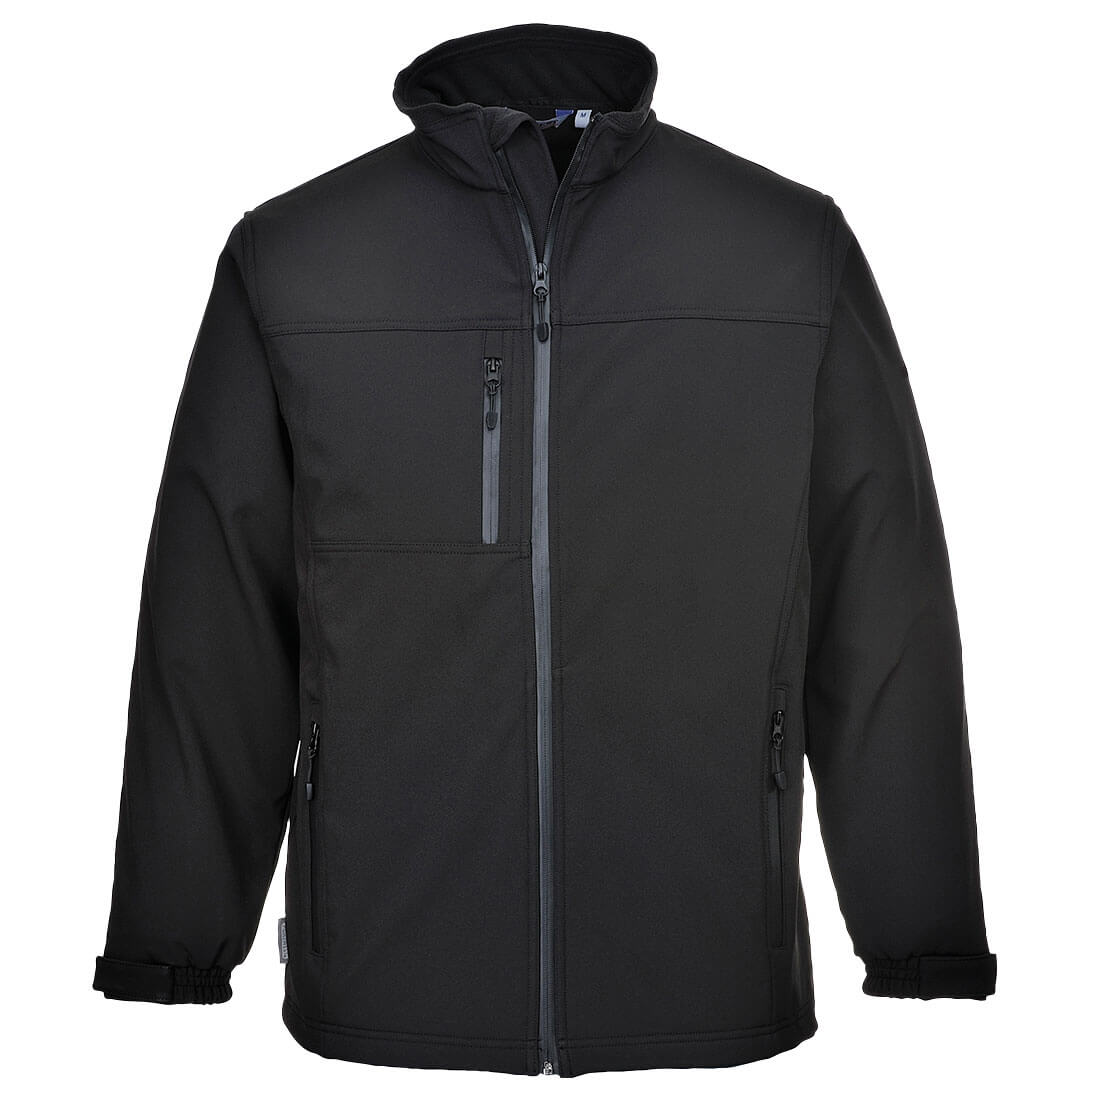 Soft Shell 3 Layer Breathable Jacket - TK50